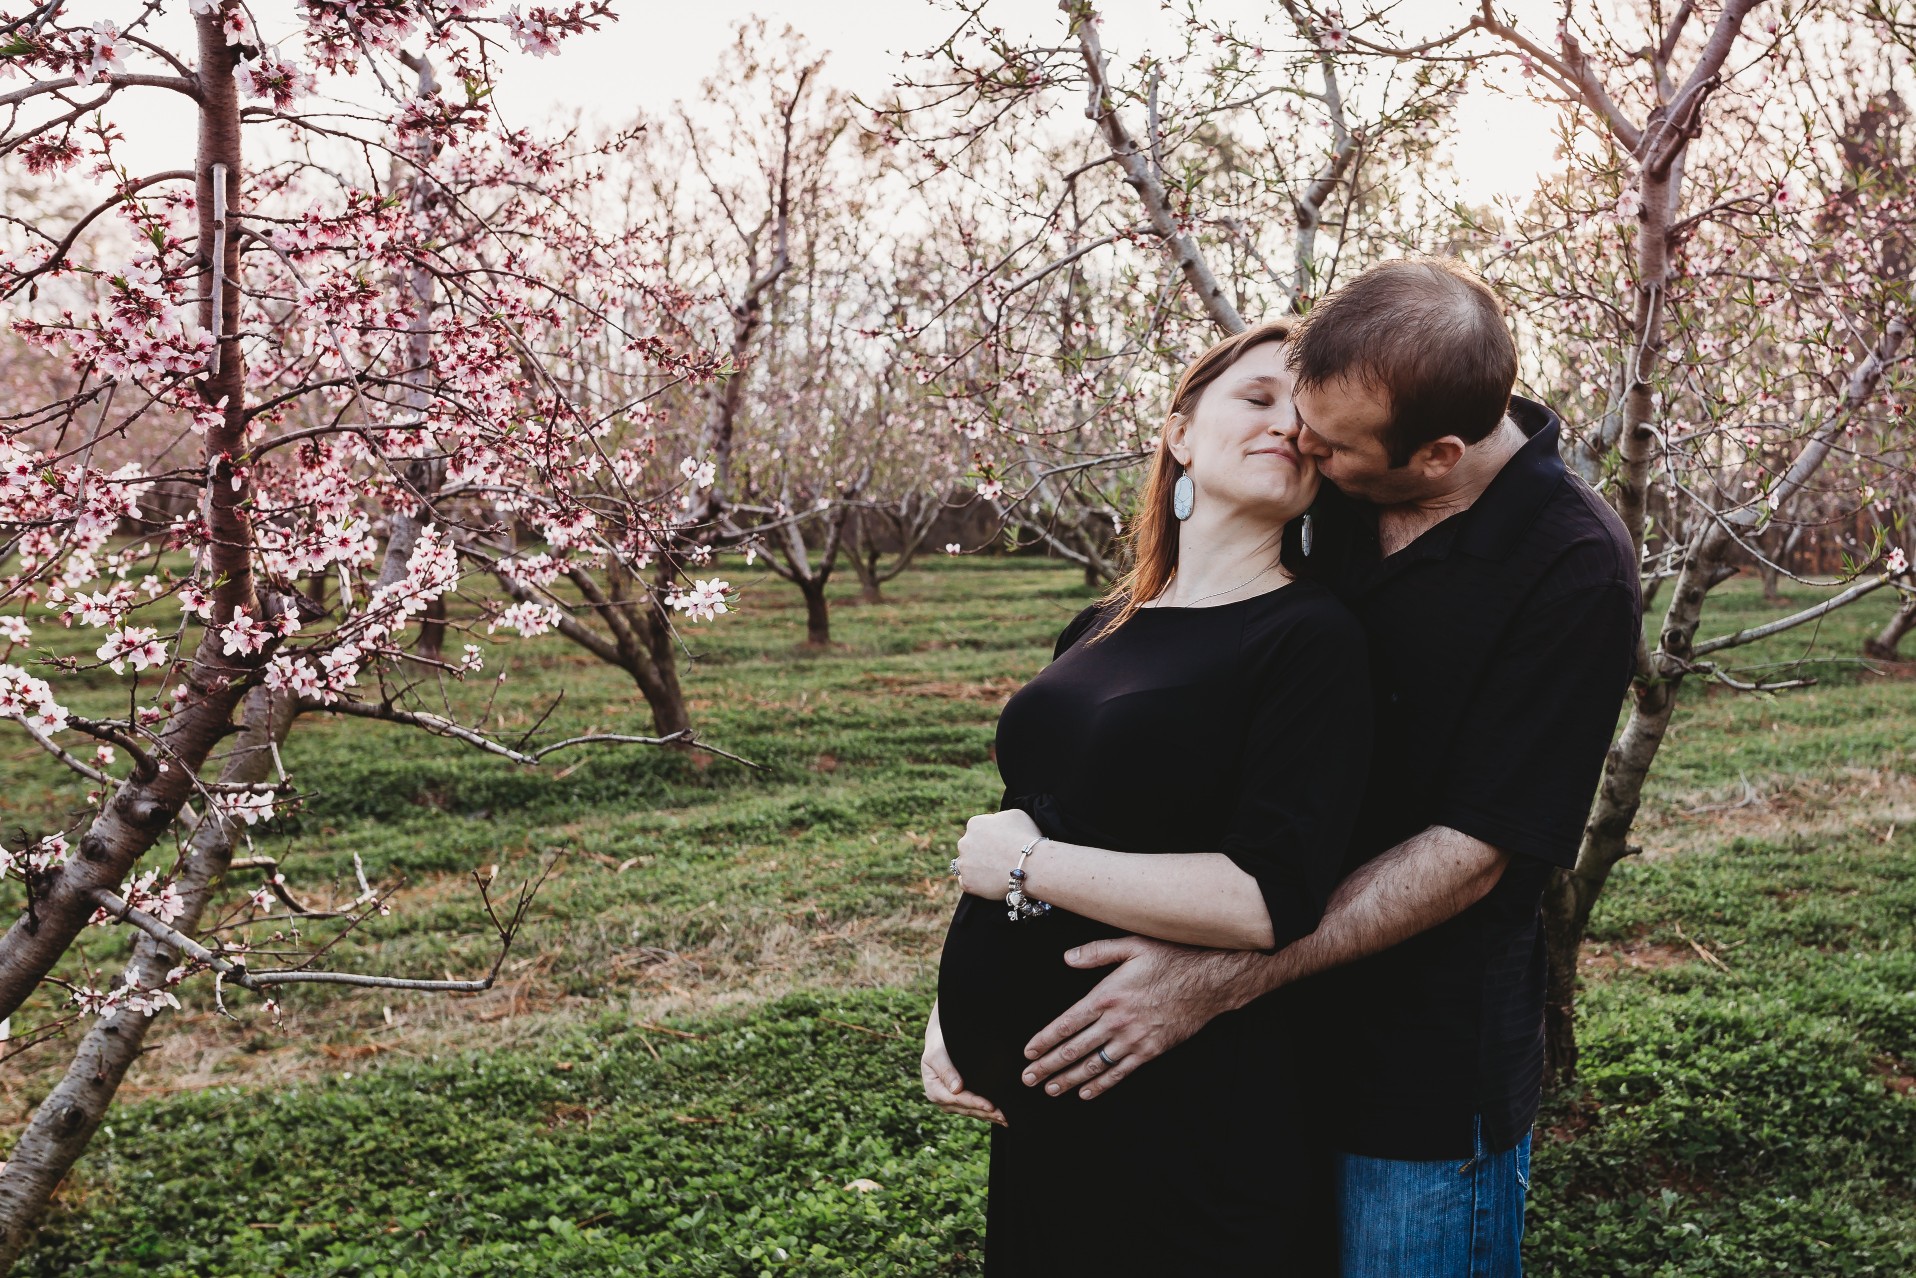 pregnancy photos maternity pictures peach blossom orchard